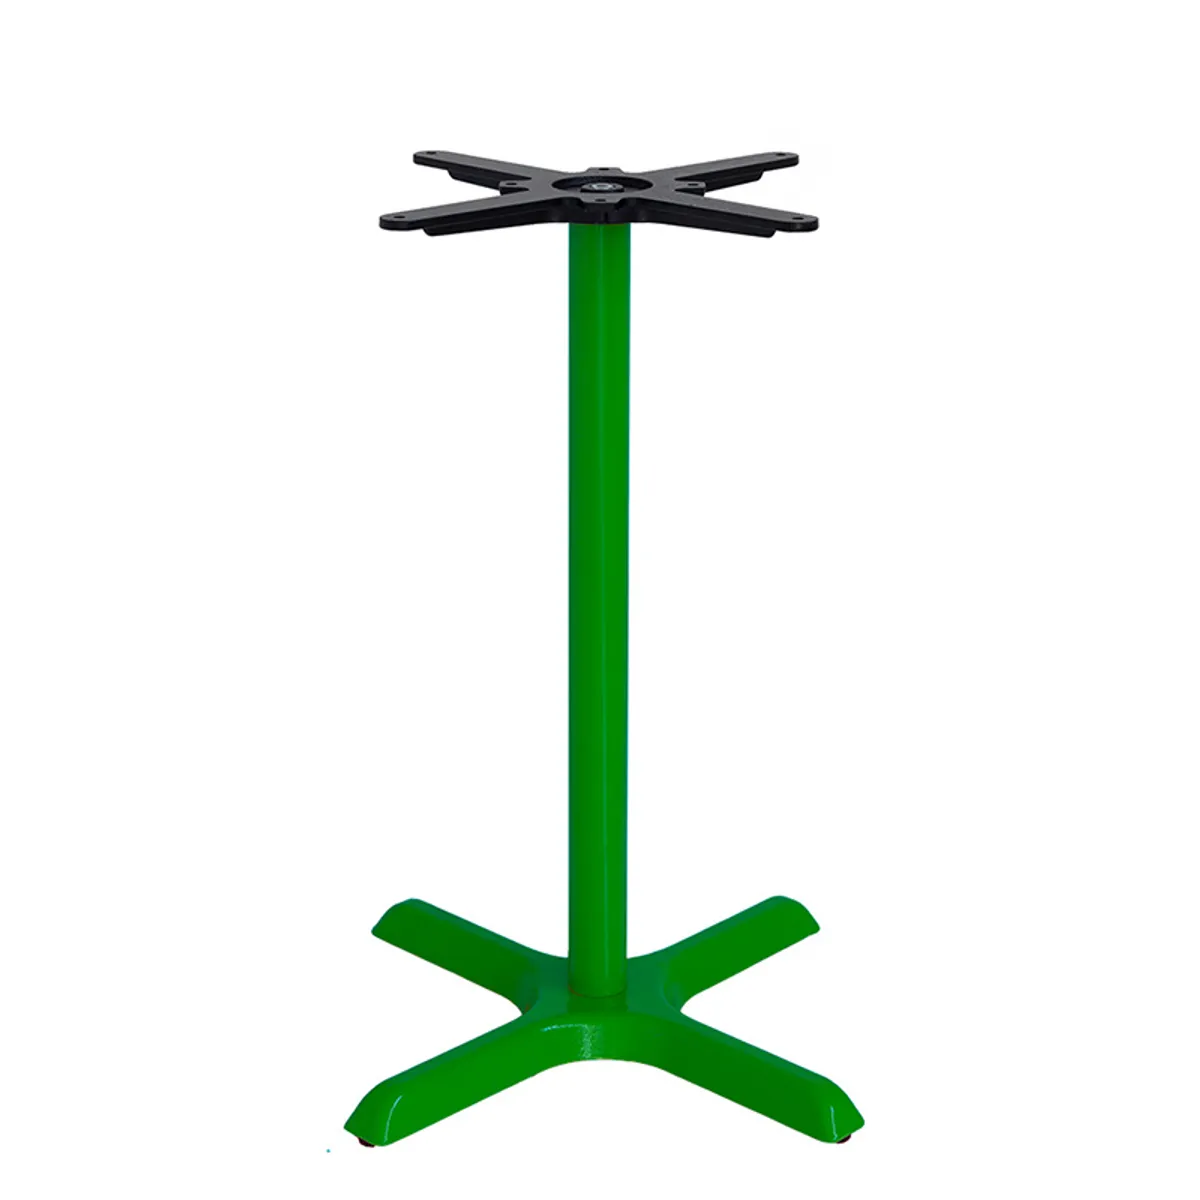 Dynamo Table Base In Ral Colour Green Suitable For Outdoor And Indoor Use